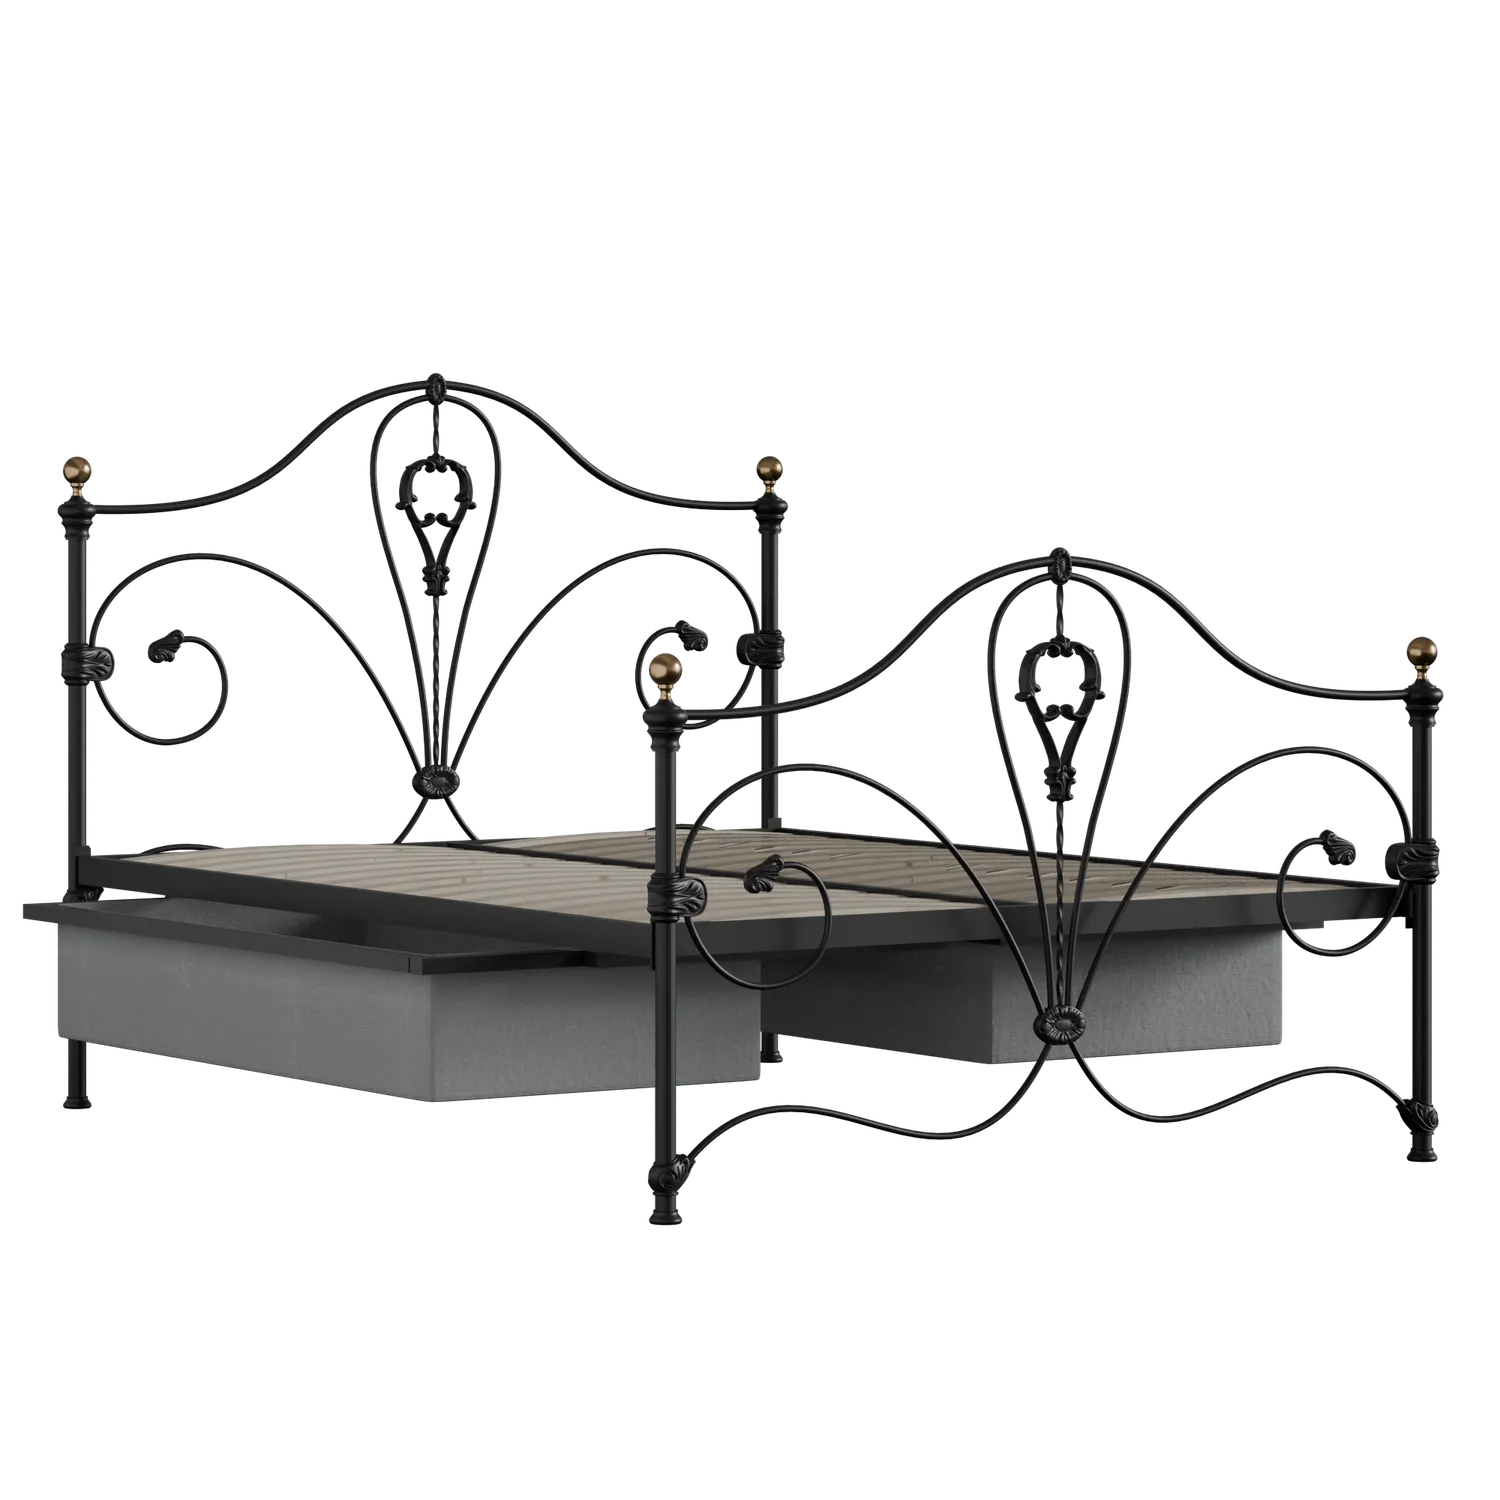 Melrose iron/metal bed in black with drawers